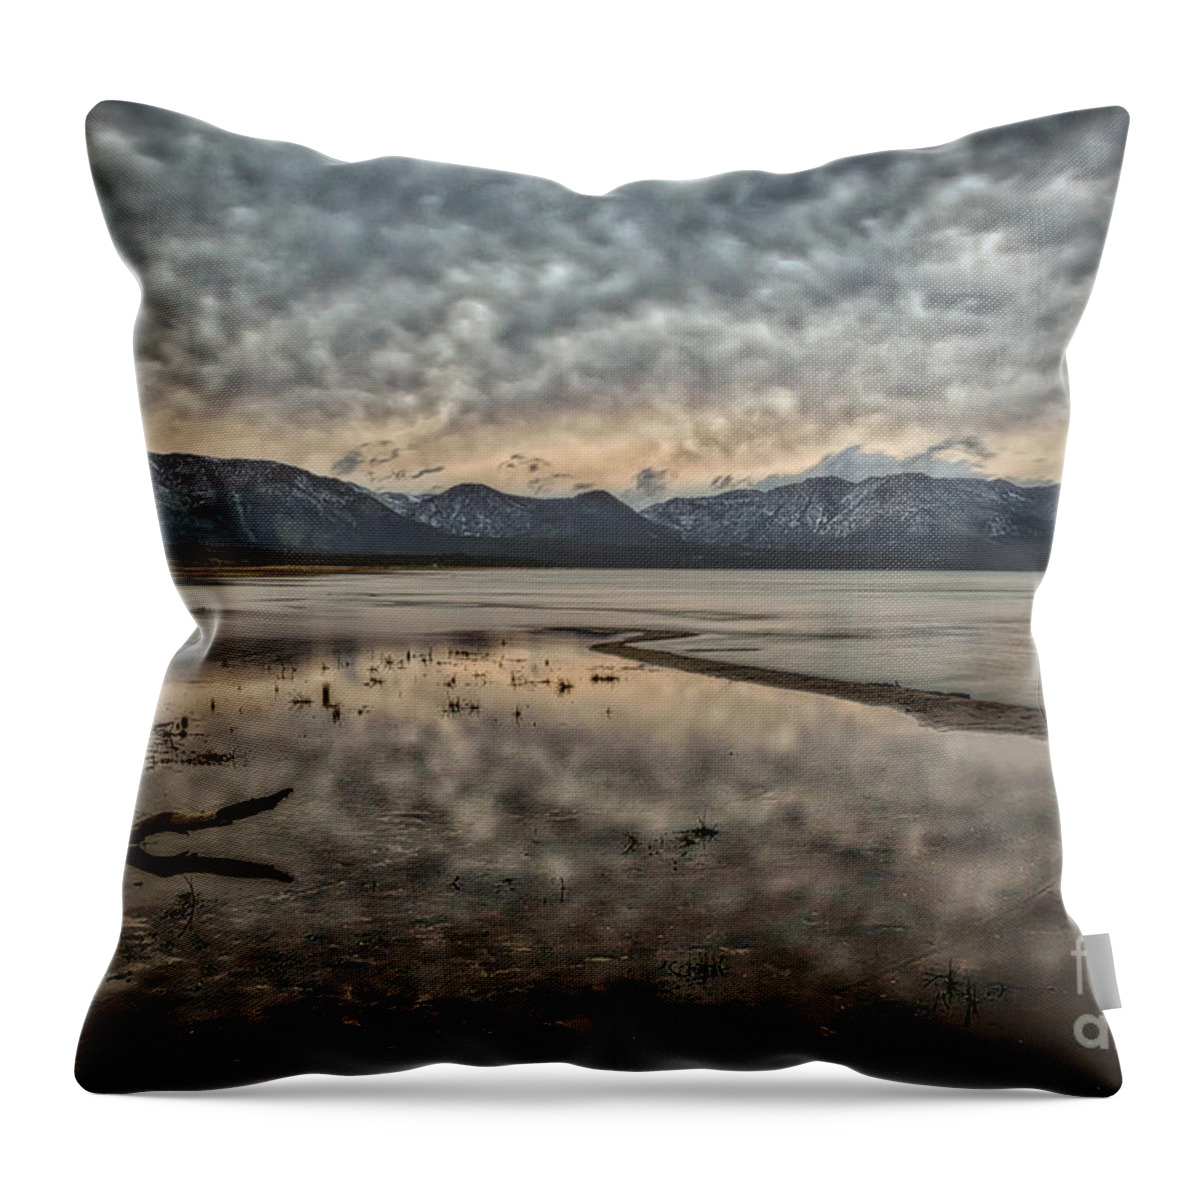 Coming Storm .lake Tahoe Throw Pillow featuring the photograph Coming Storm by Mitch Shindelbower